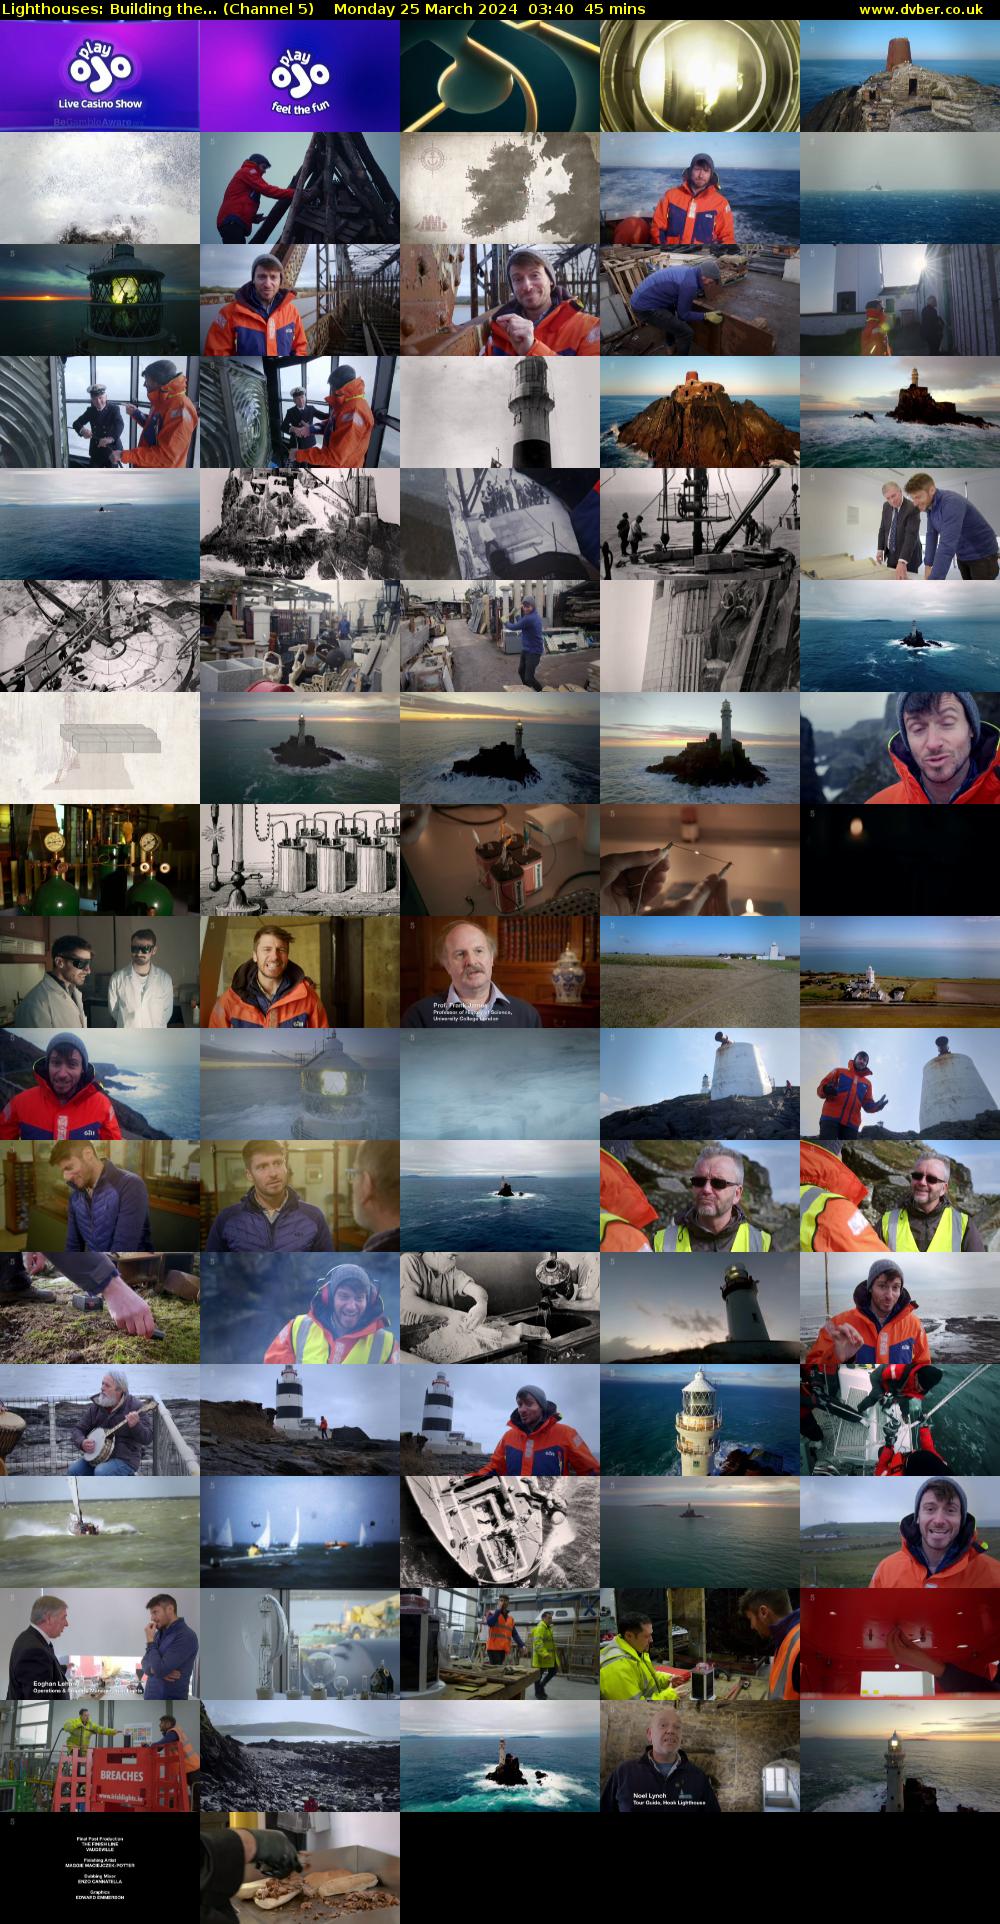 Lighthouses: Building the... (Channel 5) Monday 25 March 2024 03:40 - 04:25